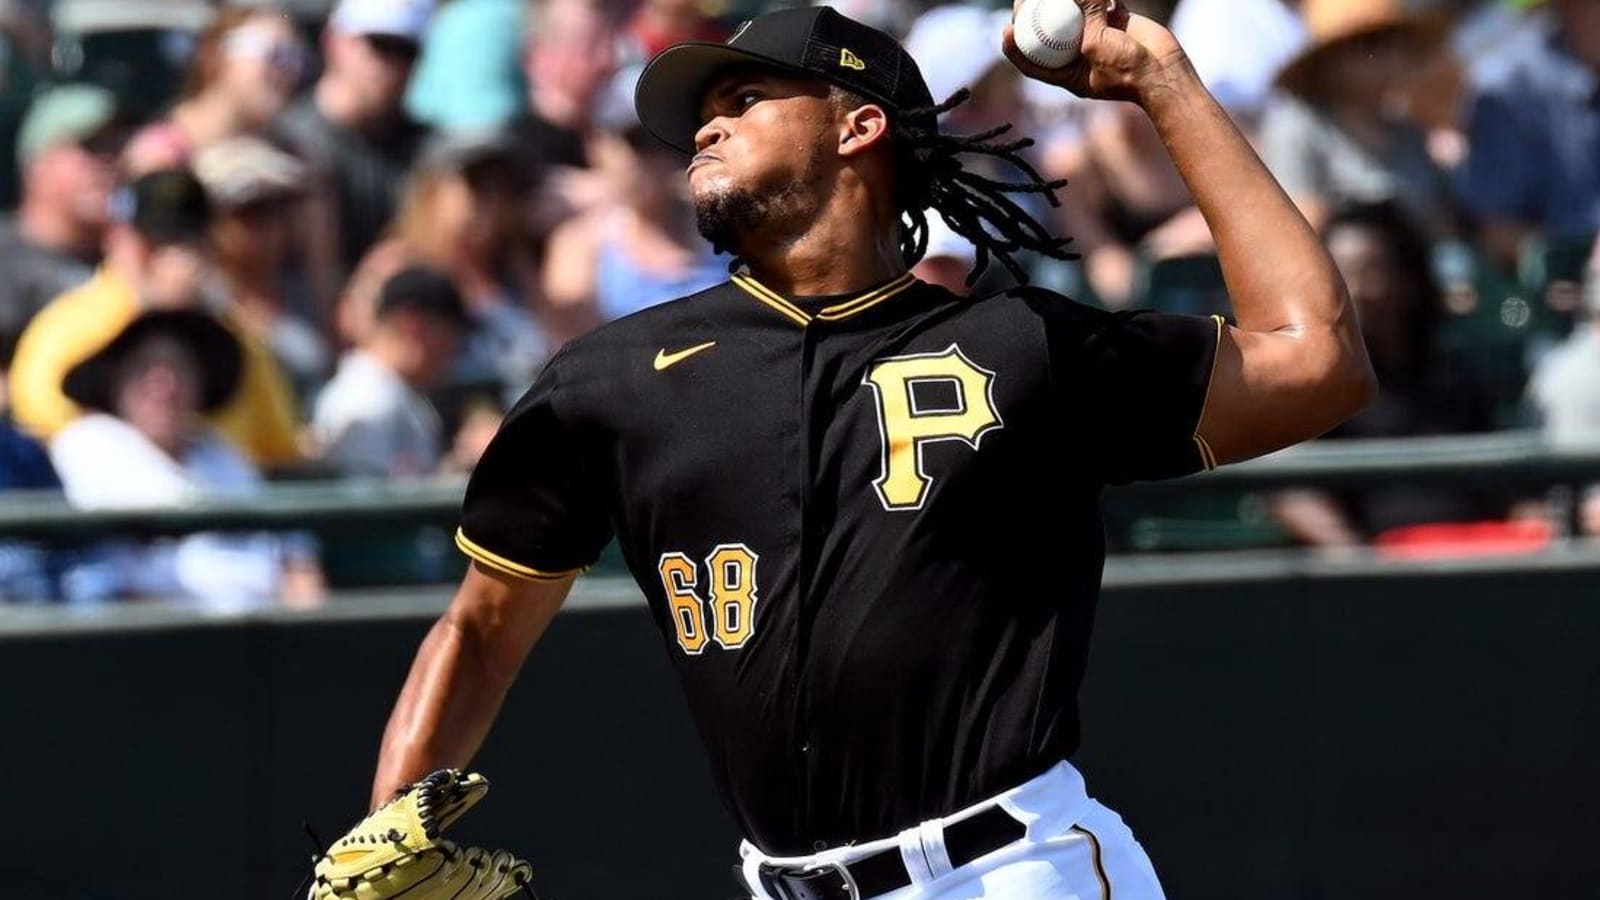 Pirates LHP Angel Perdomo suspended 3 games for HBP